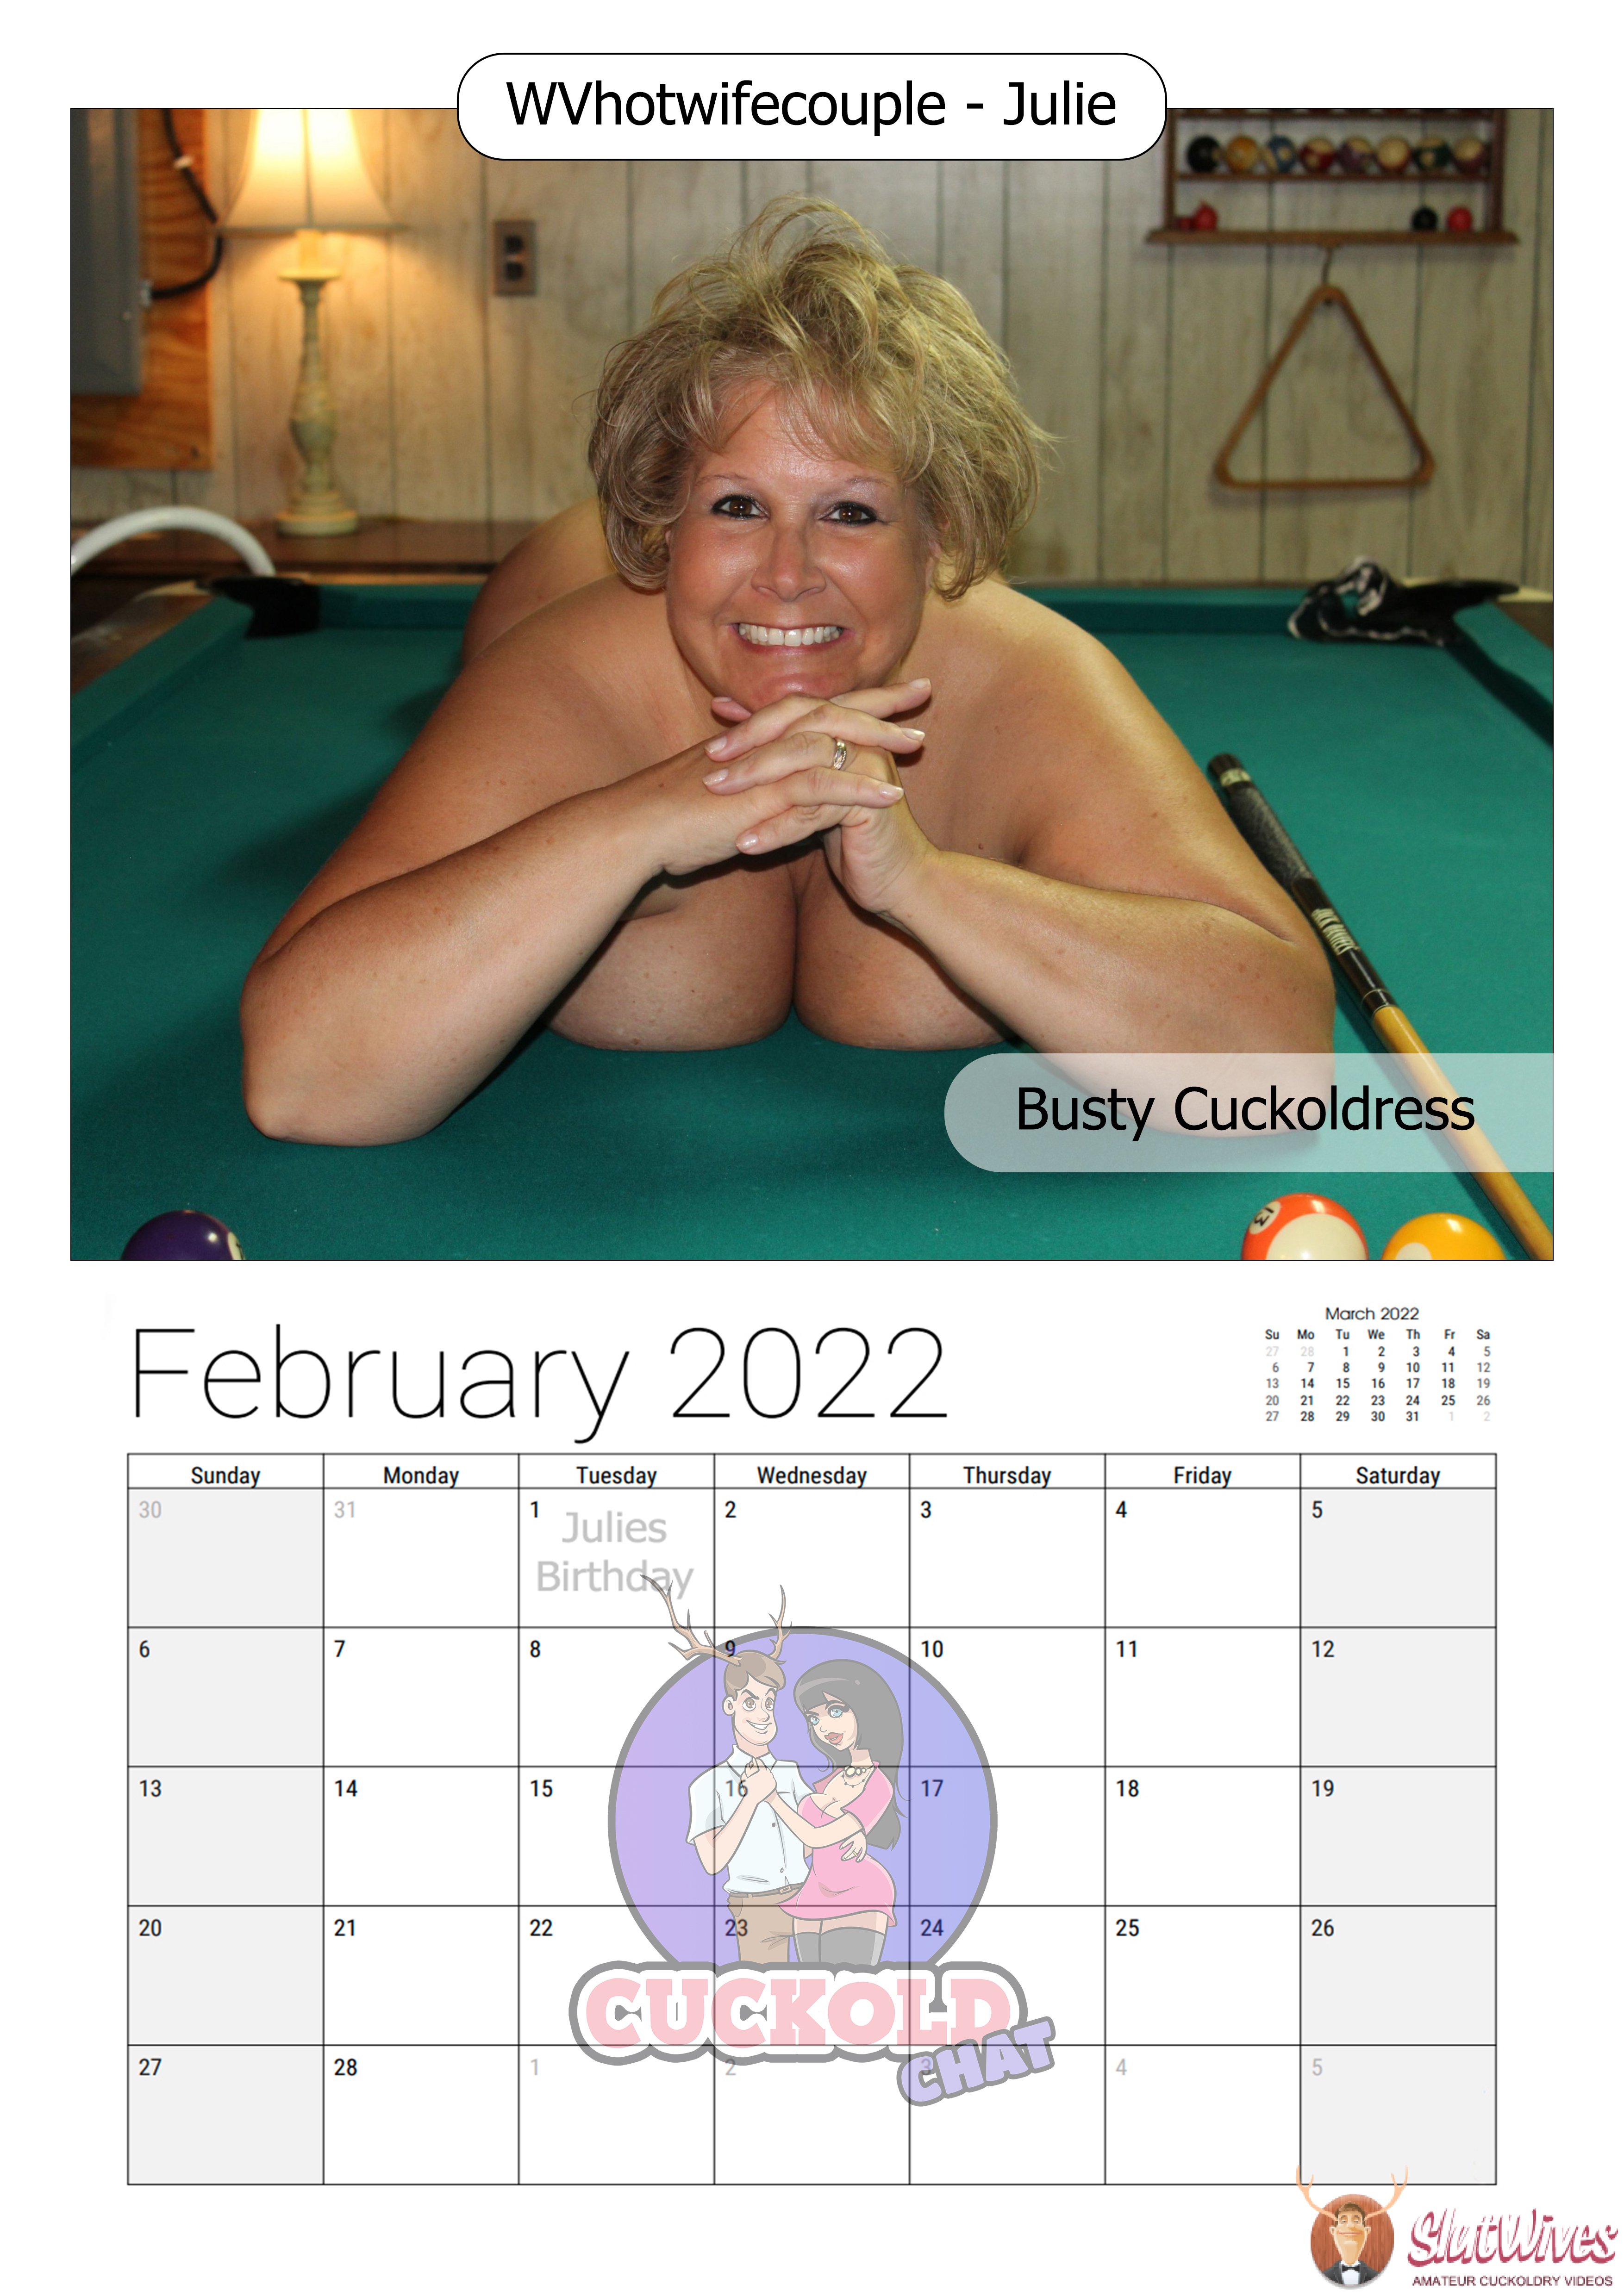 I was Miss February on another site a few years ago....